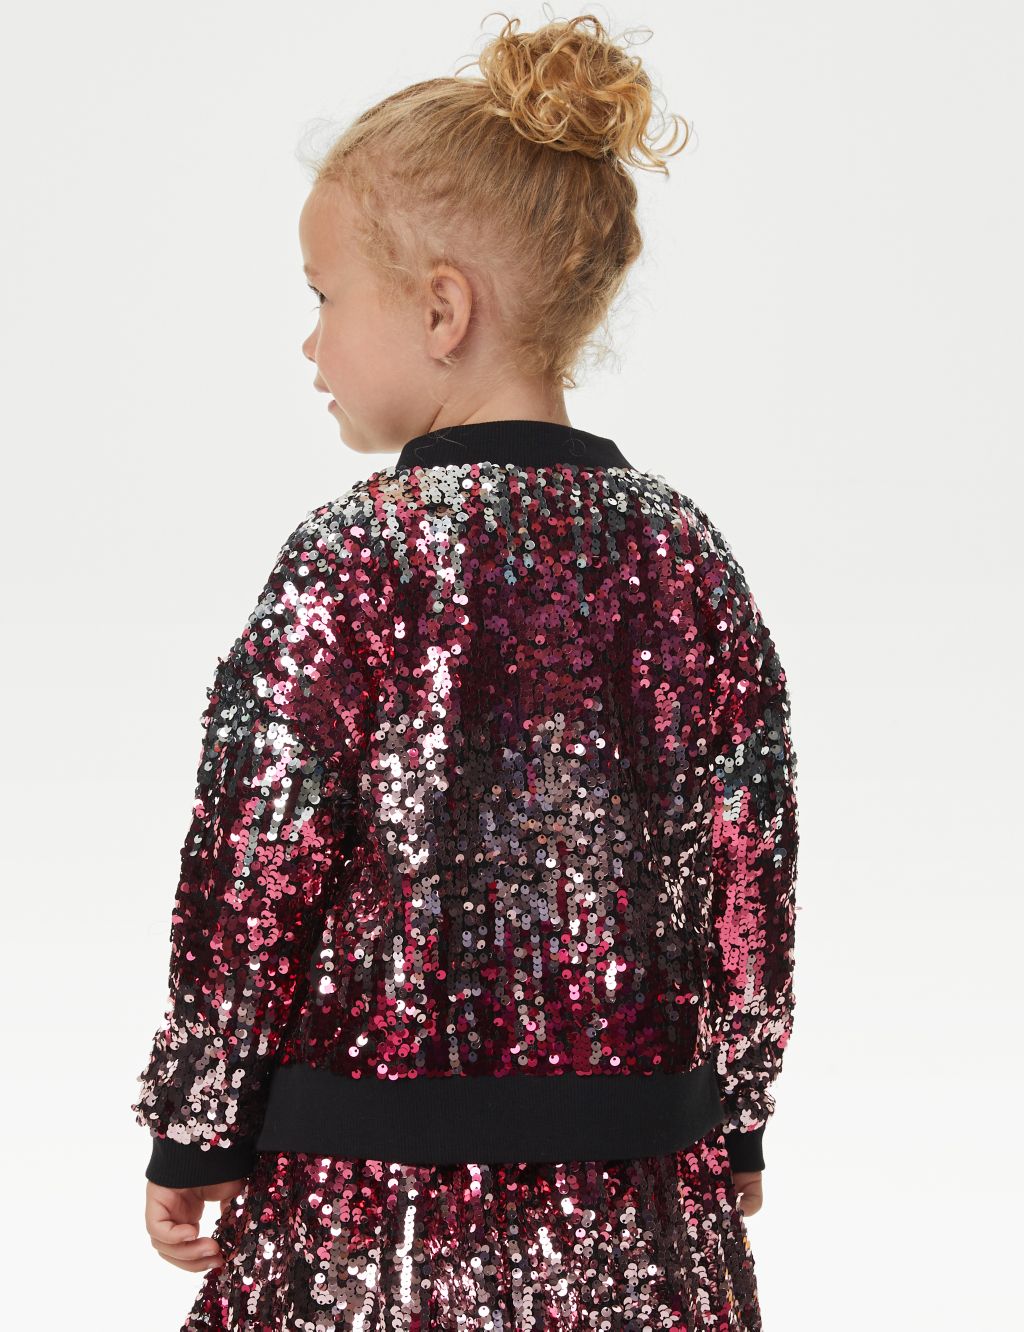 Girls Sequin Bomber & Skirt Outfit image 3